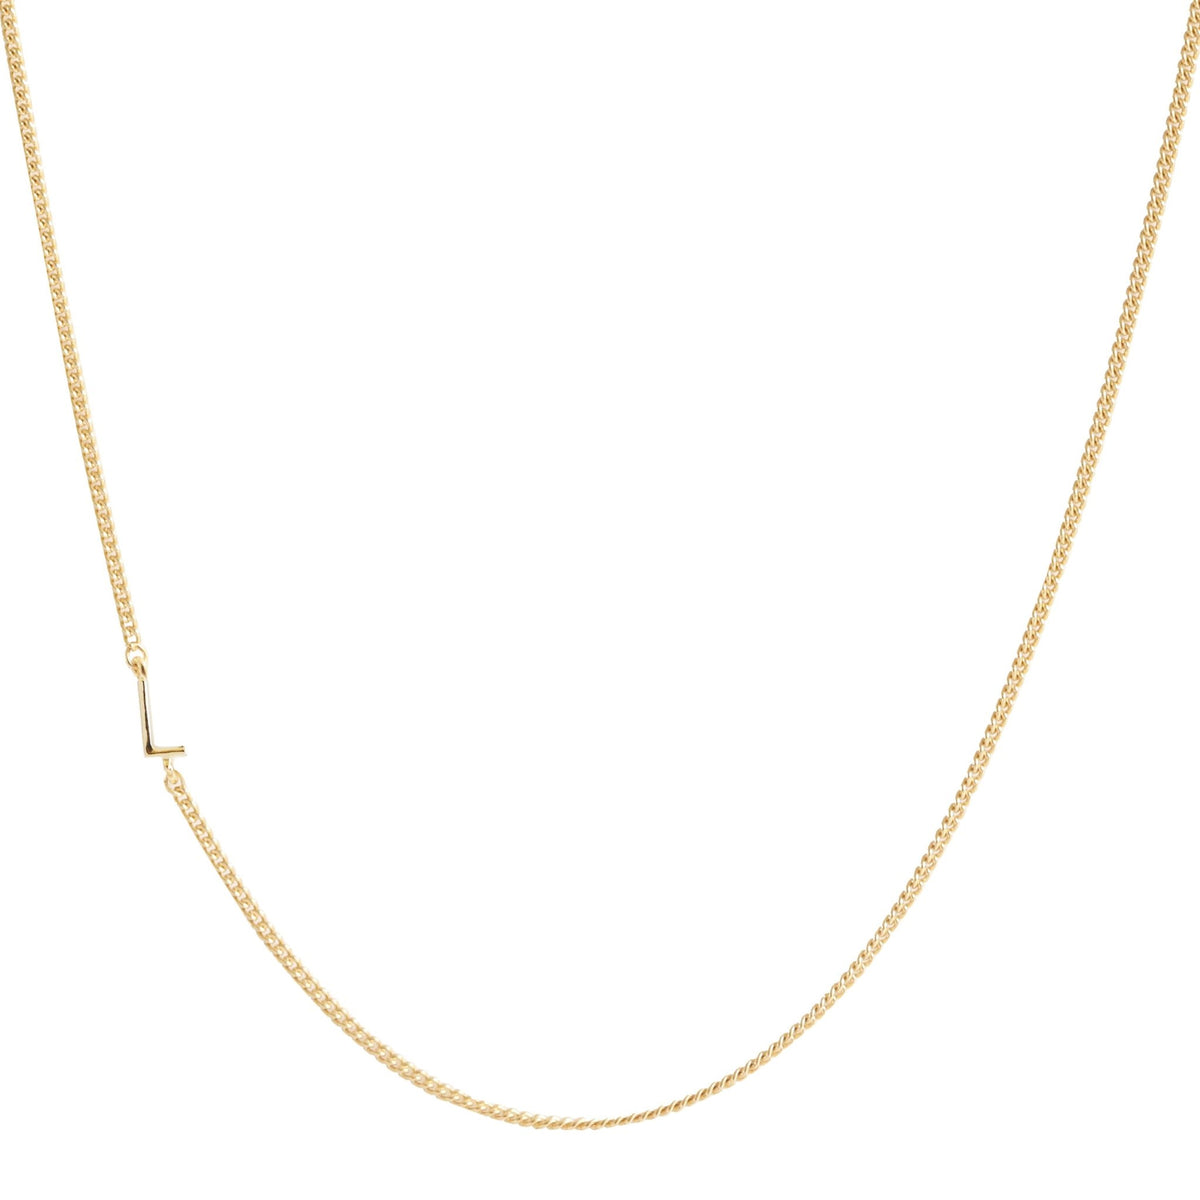 NOTABLE OFFSET INITIAL NECKLACE - L - GOLD - SO PRETTY CARA COTTER